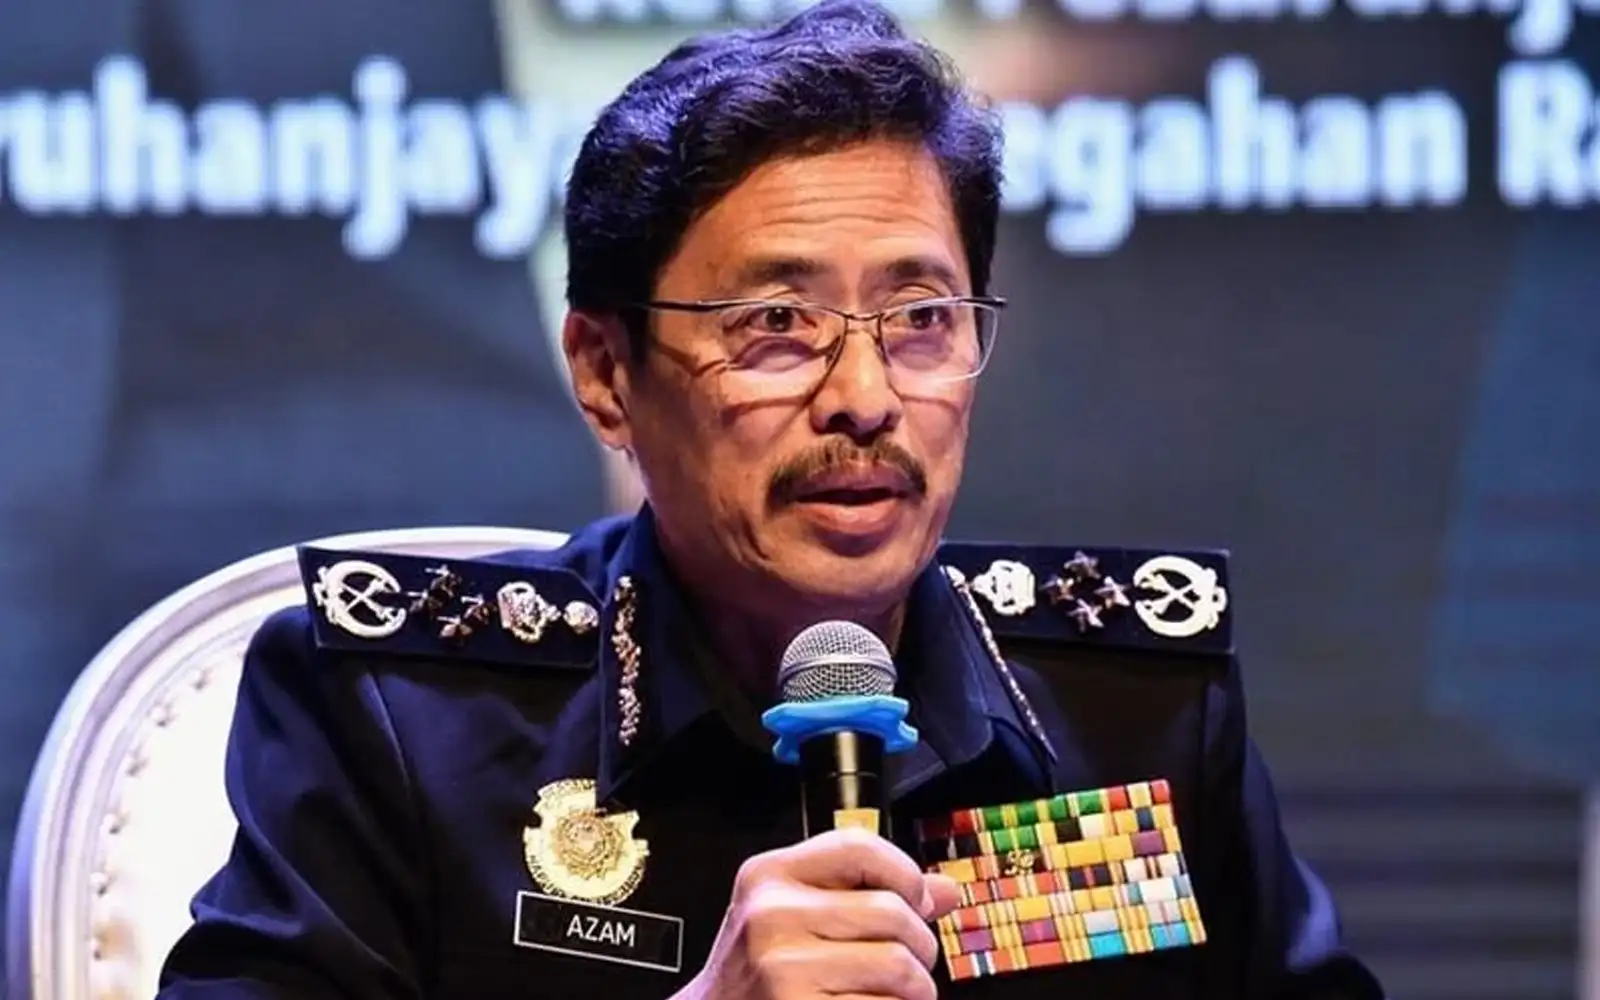 azam’s contract as macc chief extended